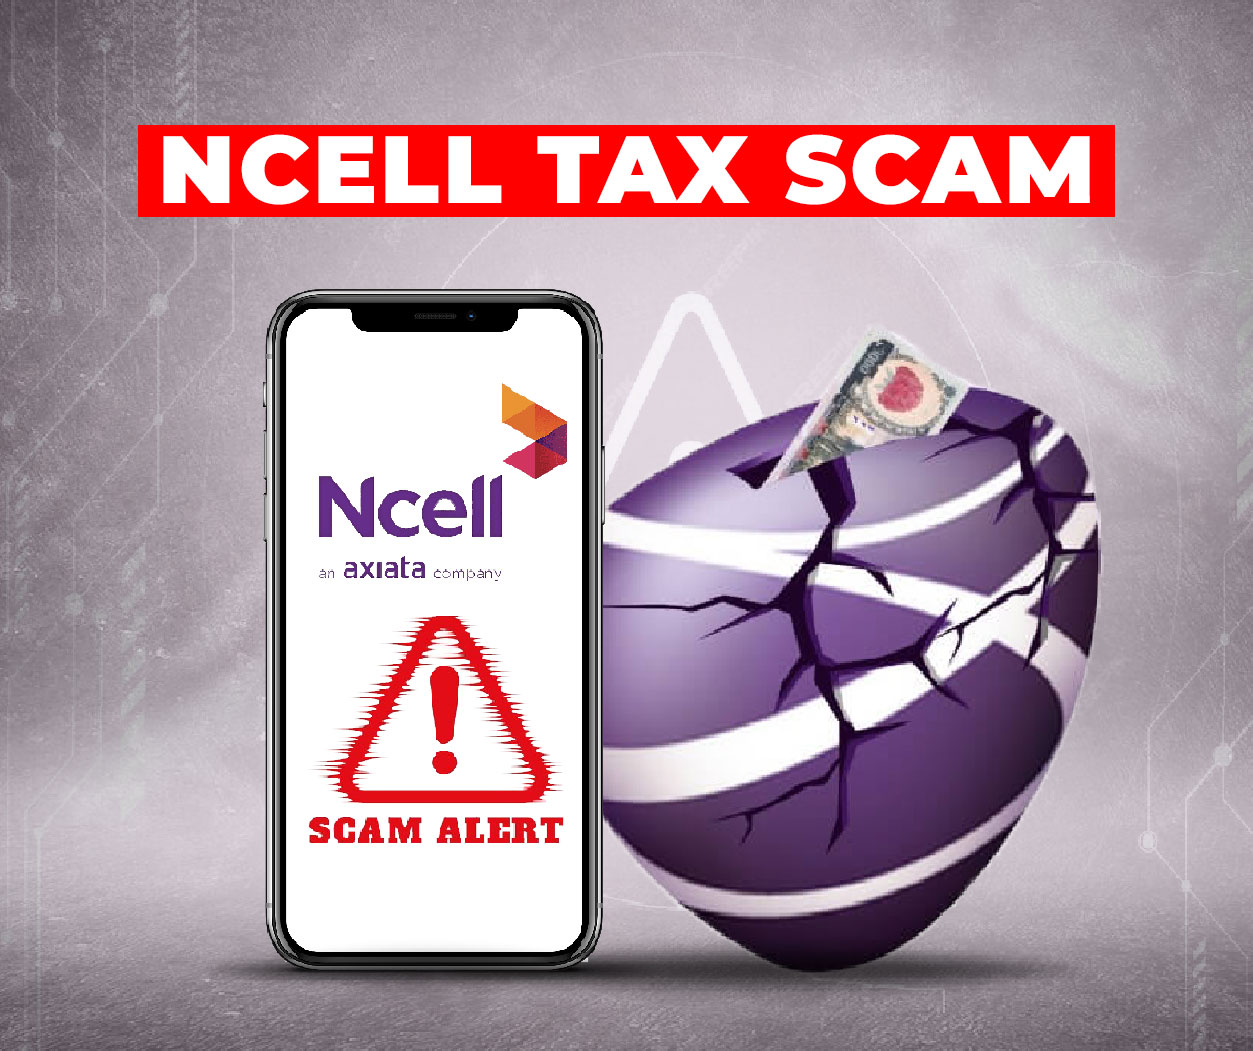 NCELL TAX SCAM